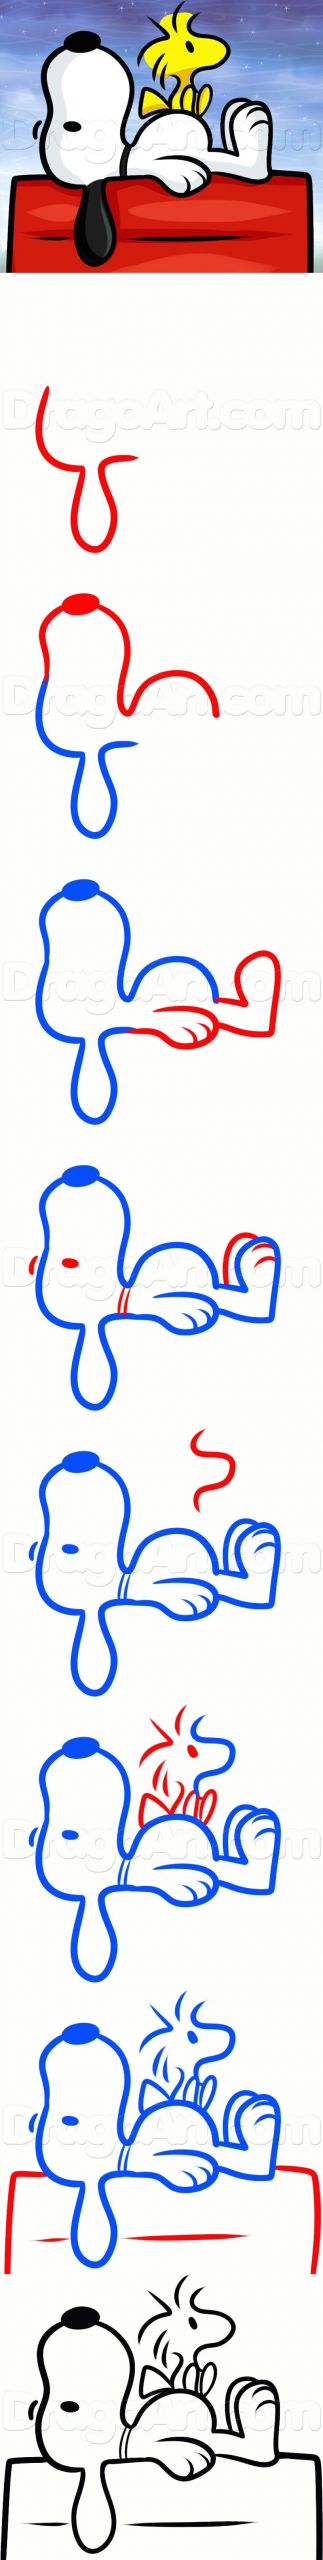 How to Draw Snoopy Step by Step for Kids Easy How to Draw Snoopy and Woodstock Ideen Furs Zeichnen